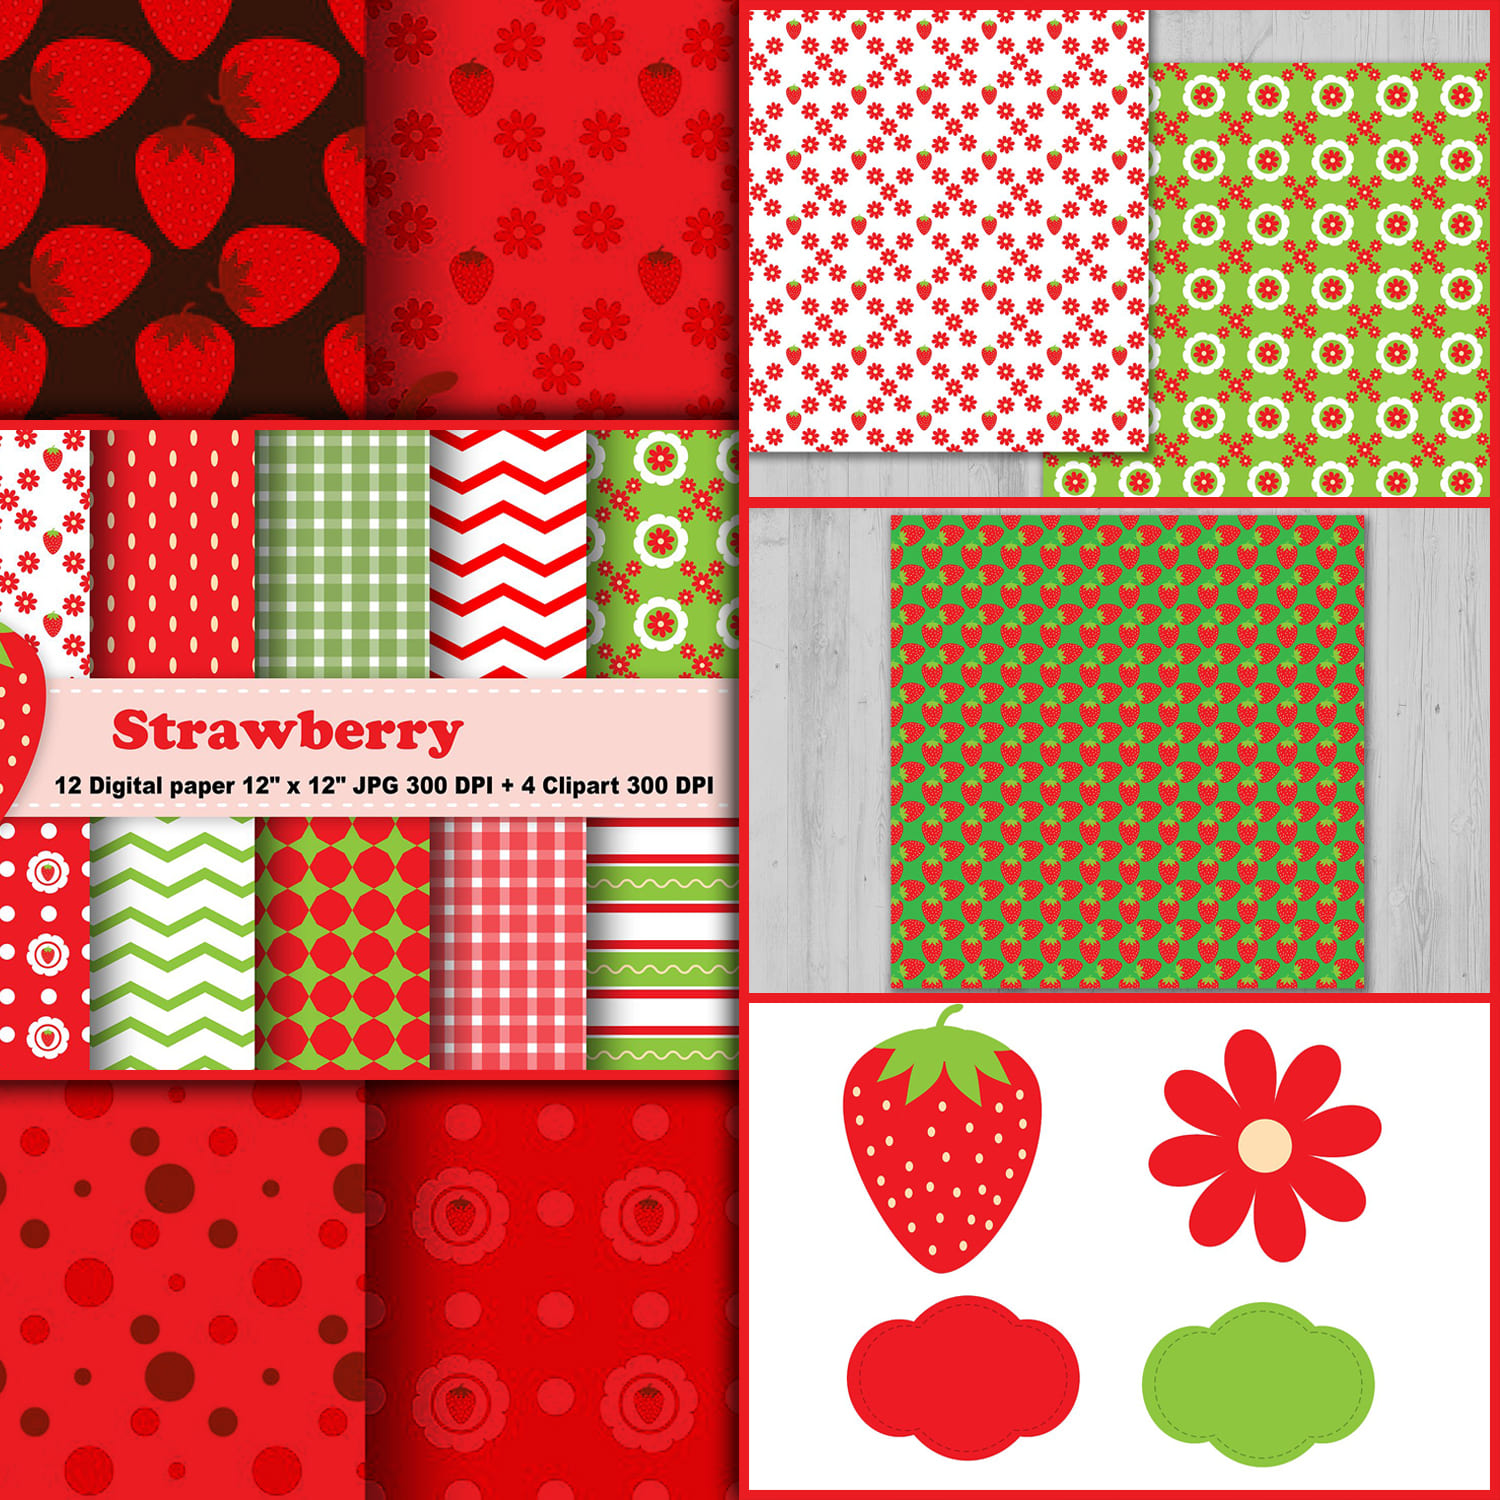 Strawberry Digital Paper, Fruits Background by CosmosFineArt.